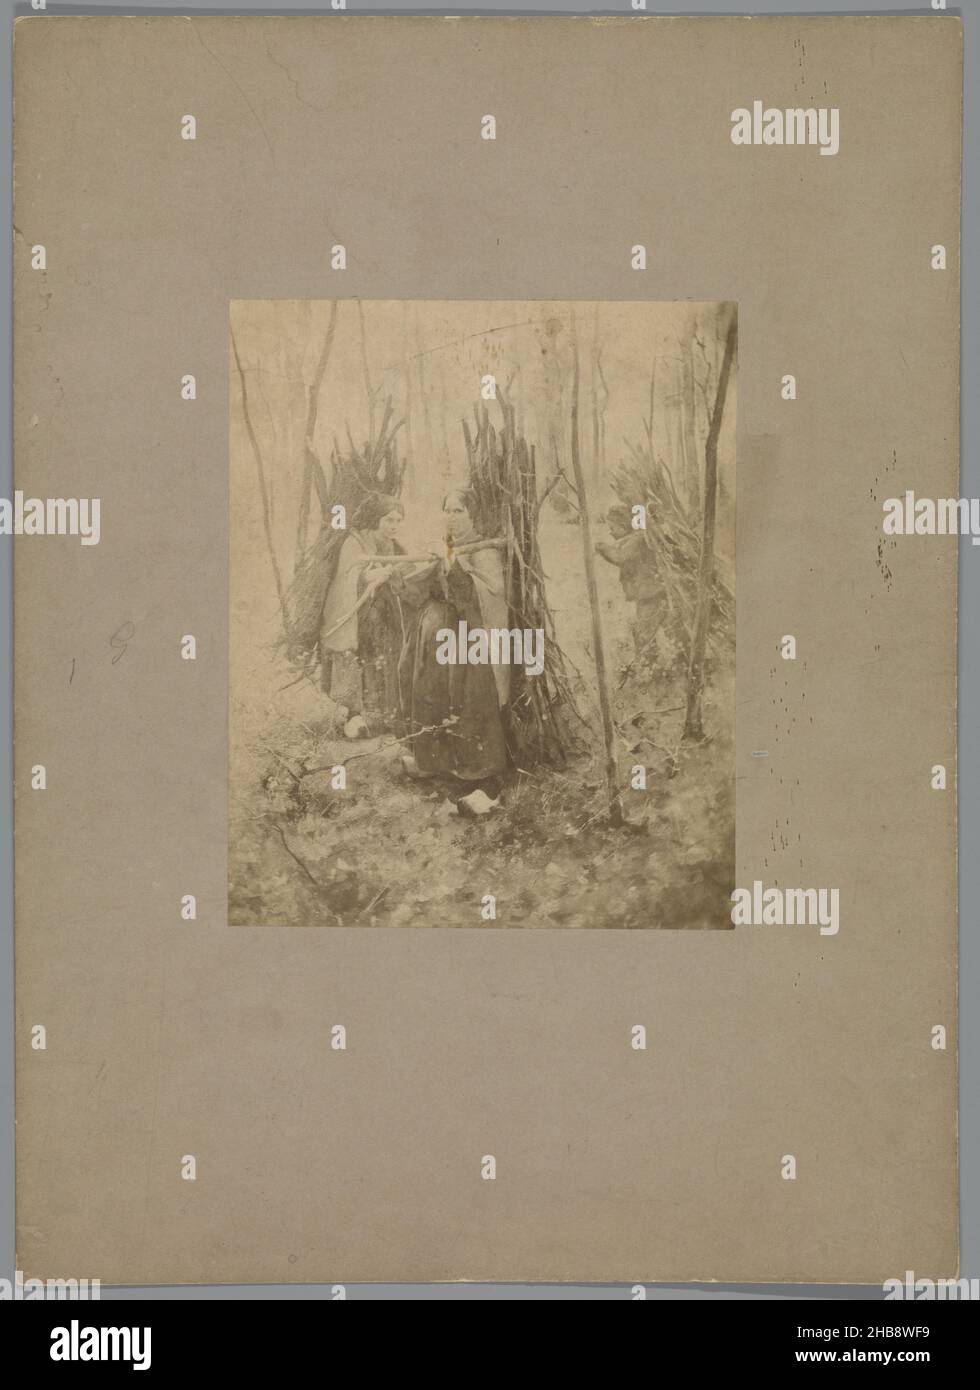 Reproduction after a painting by Willem Witsen of two women and a child with branches on their backs, anonymous, Willem Witsen, Netherlands, c. 1860 - c. 1915, paper, cardboard, albumen print, height 212 mm × width 172 mmheight 427 mm × width 320 mm Stock Photo